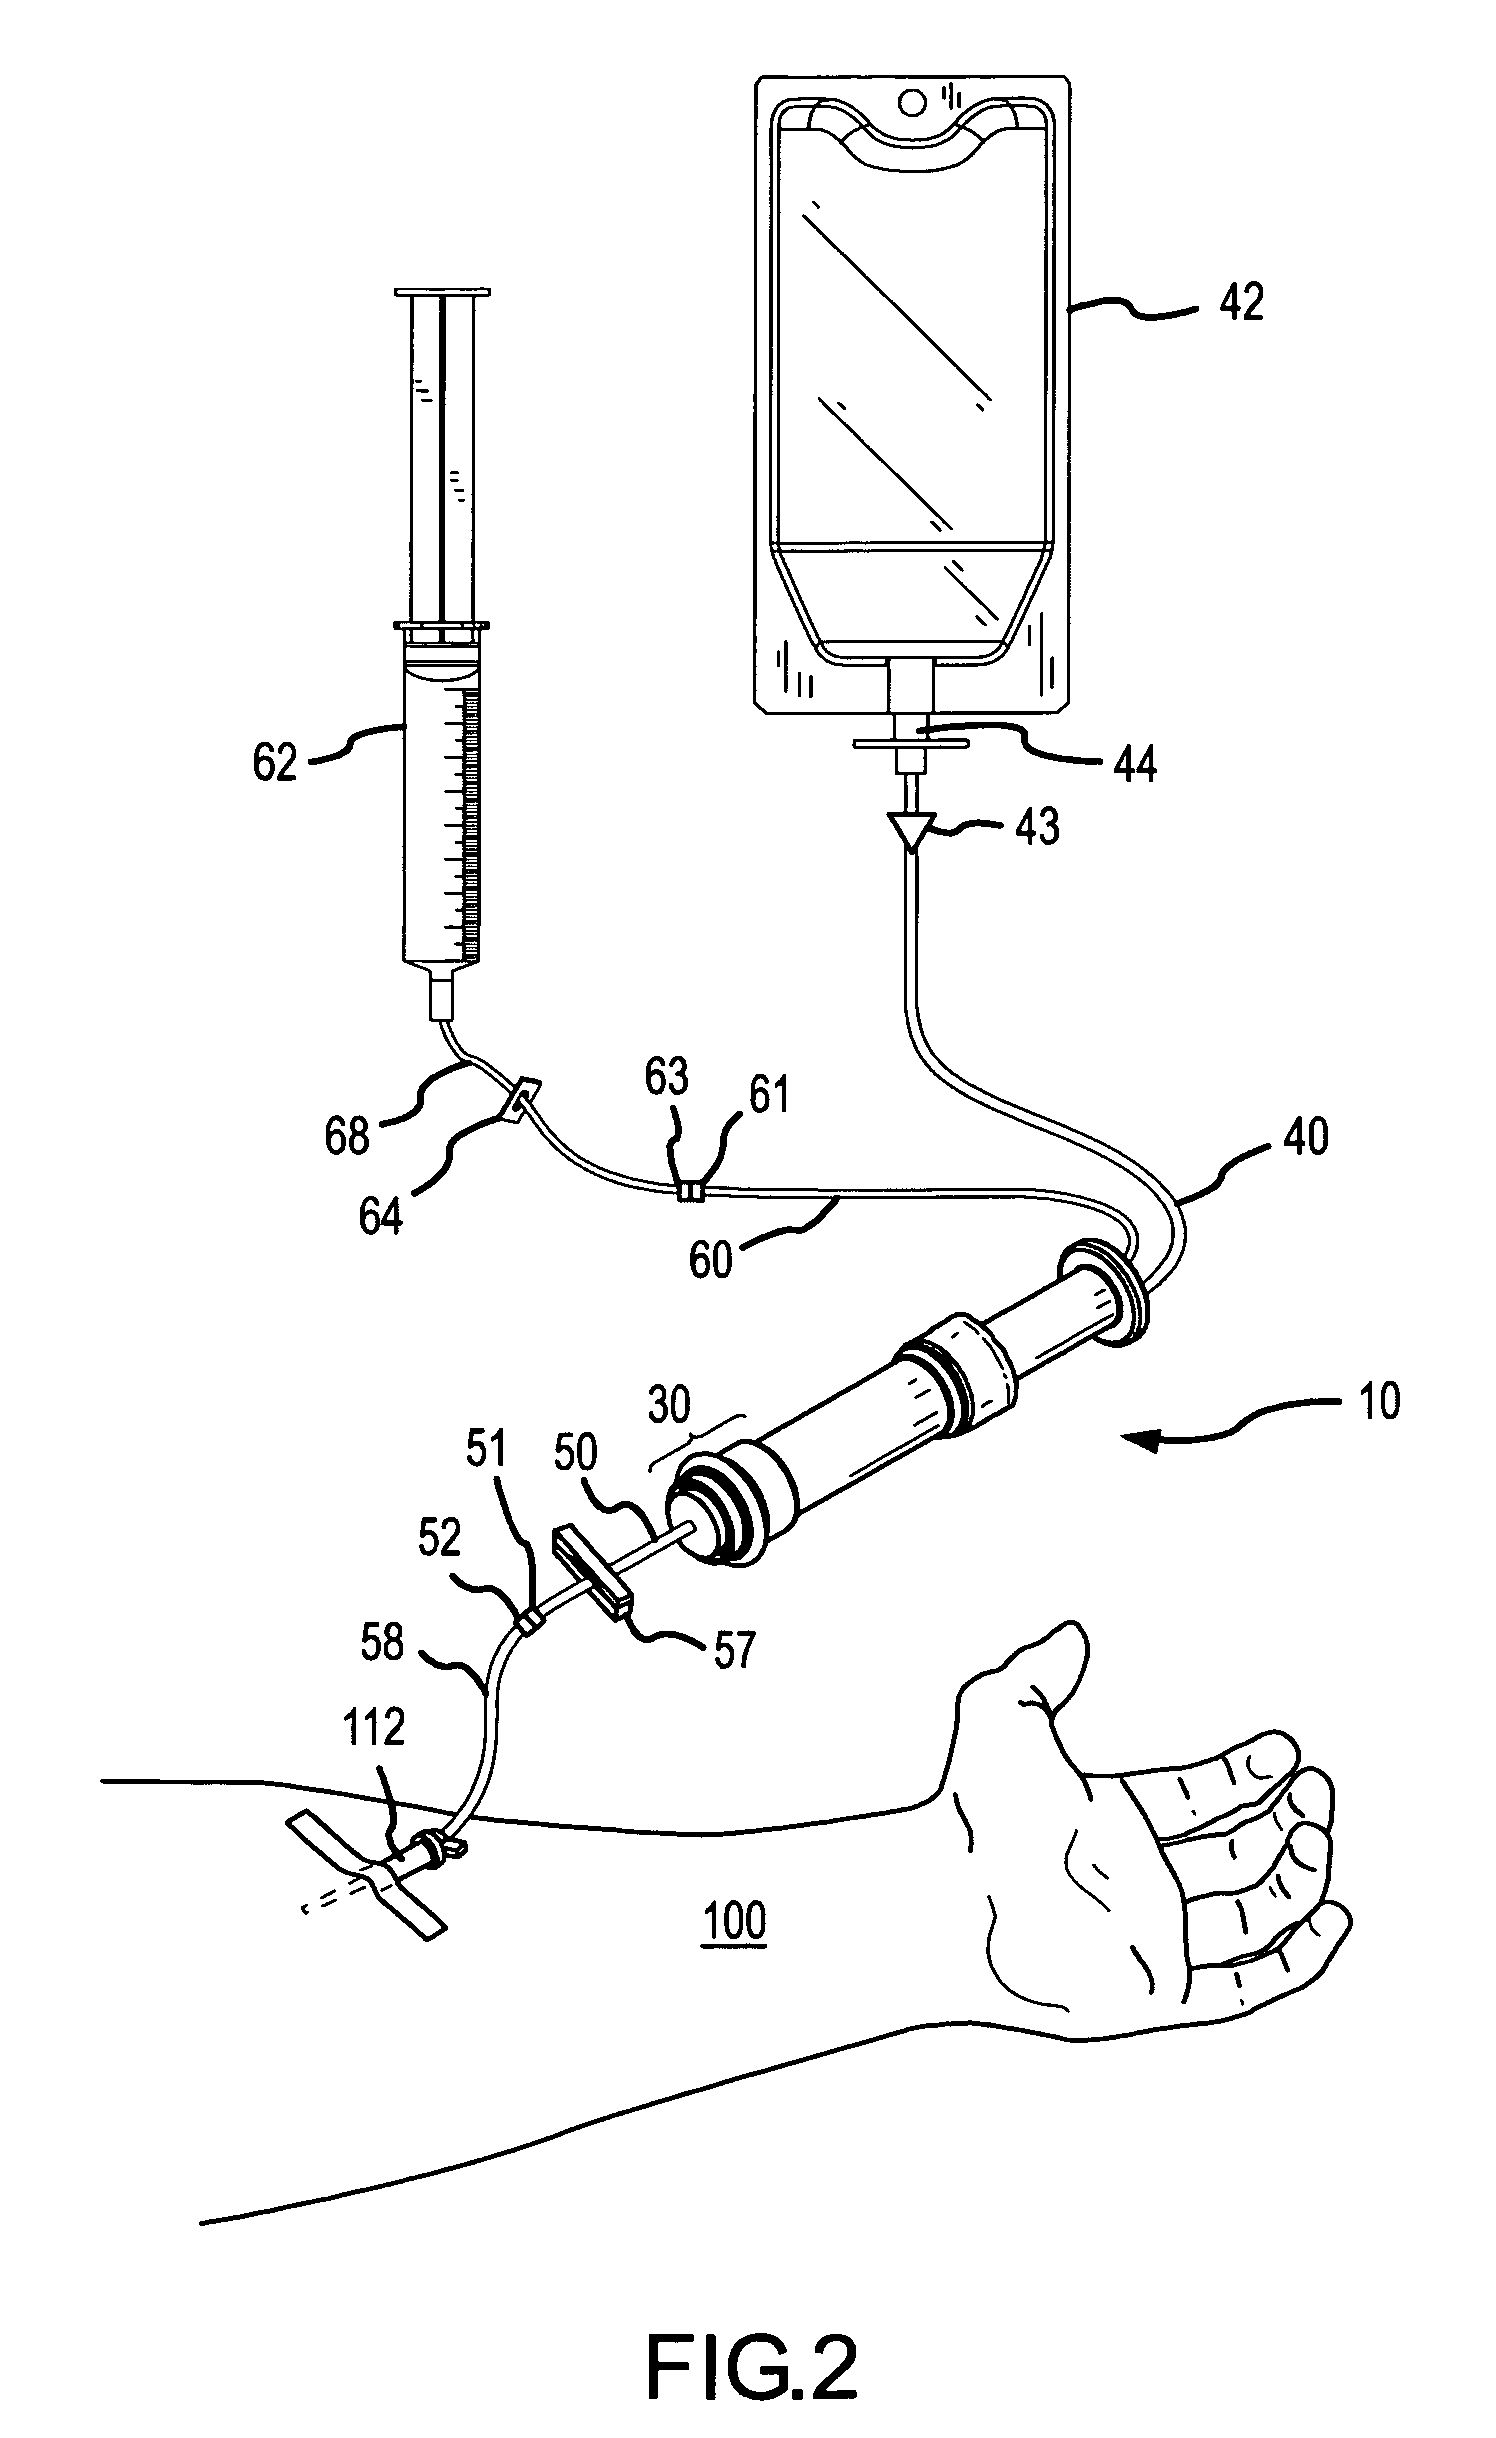 Apparatus, method and system for administration of IV liquid medication and IV flush solutions